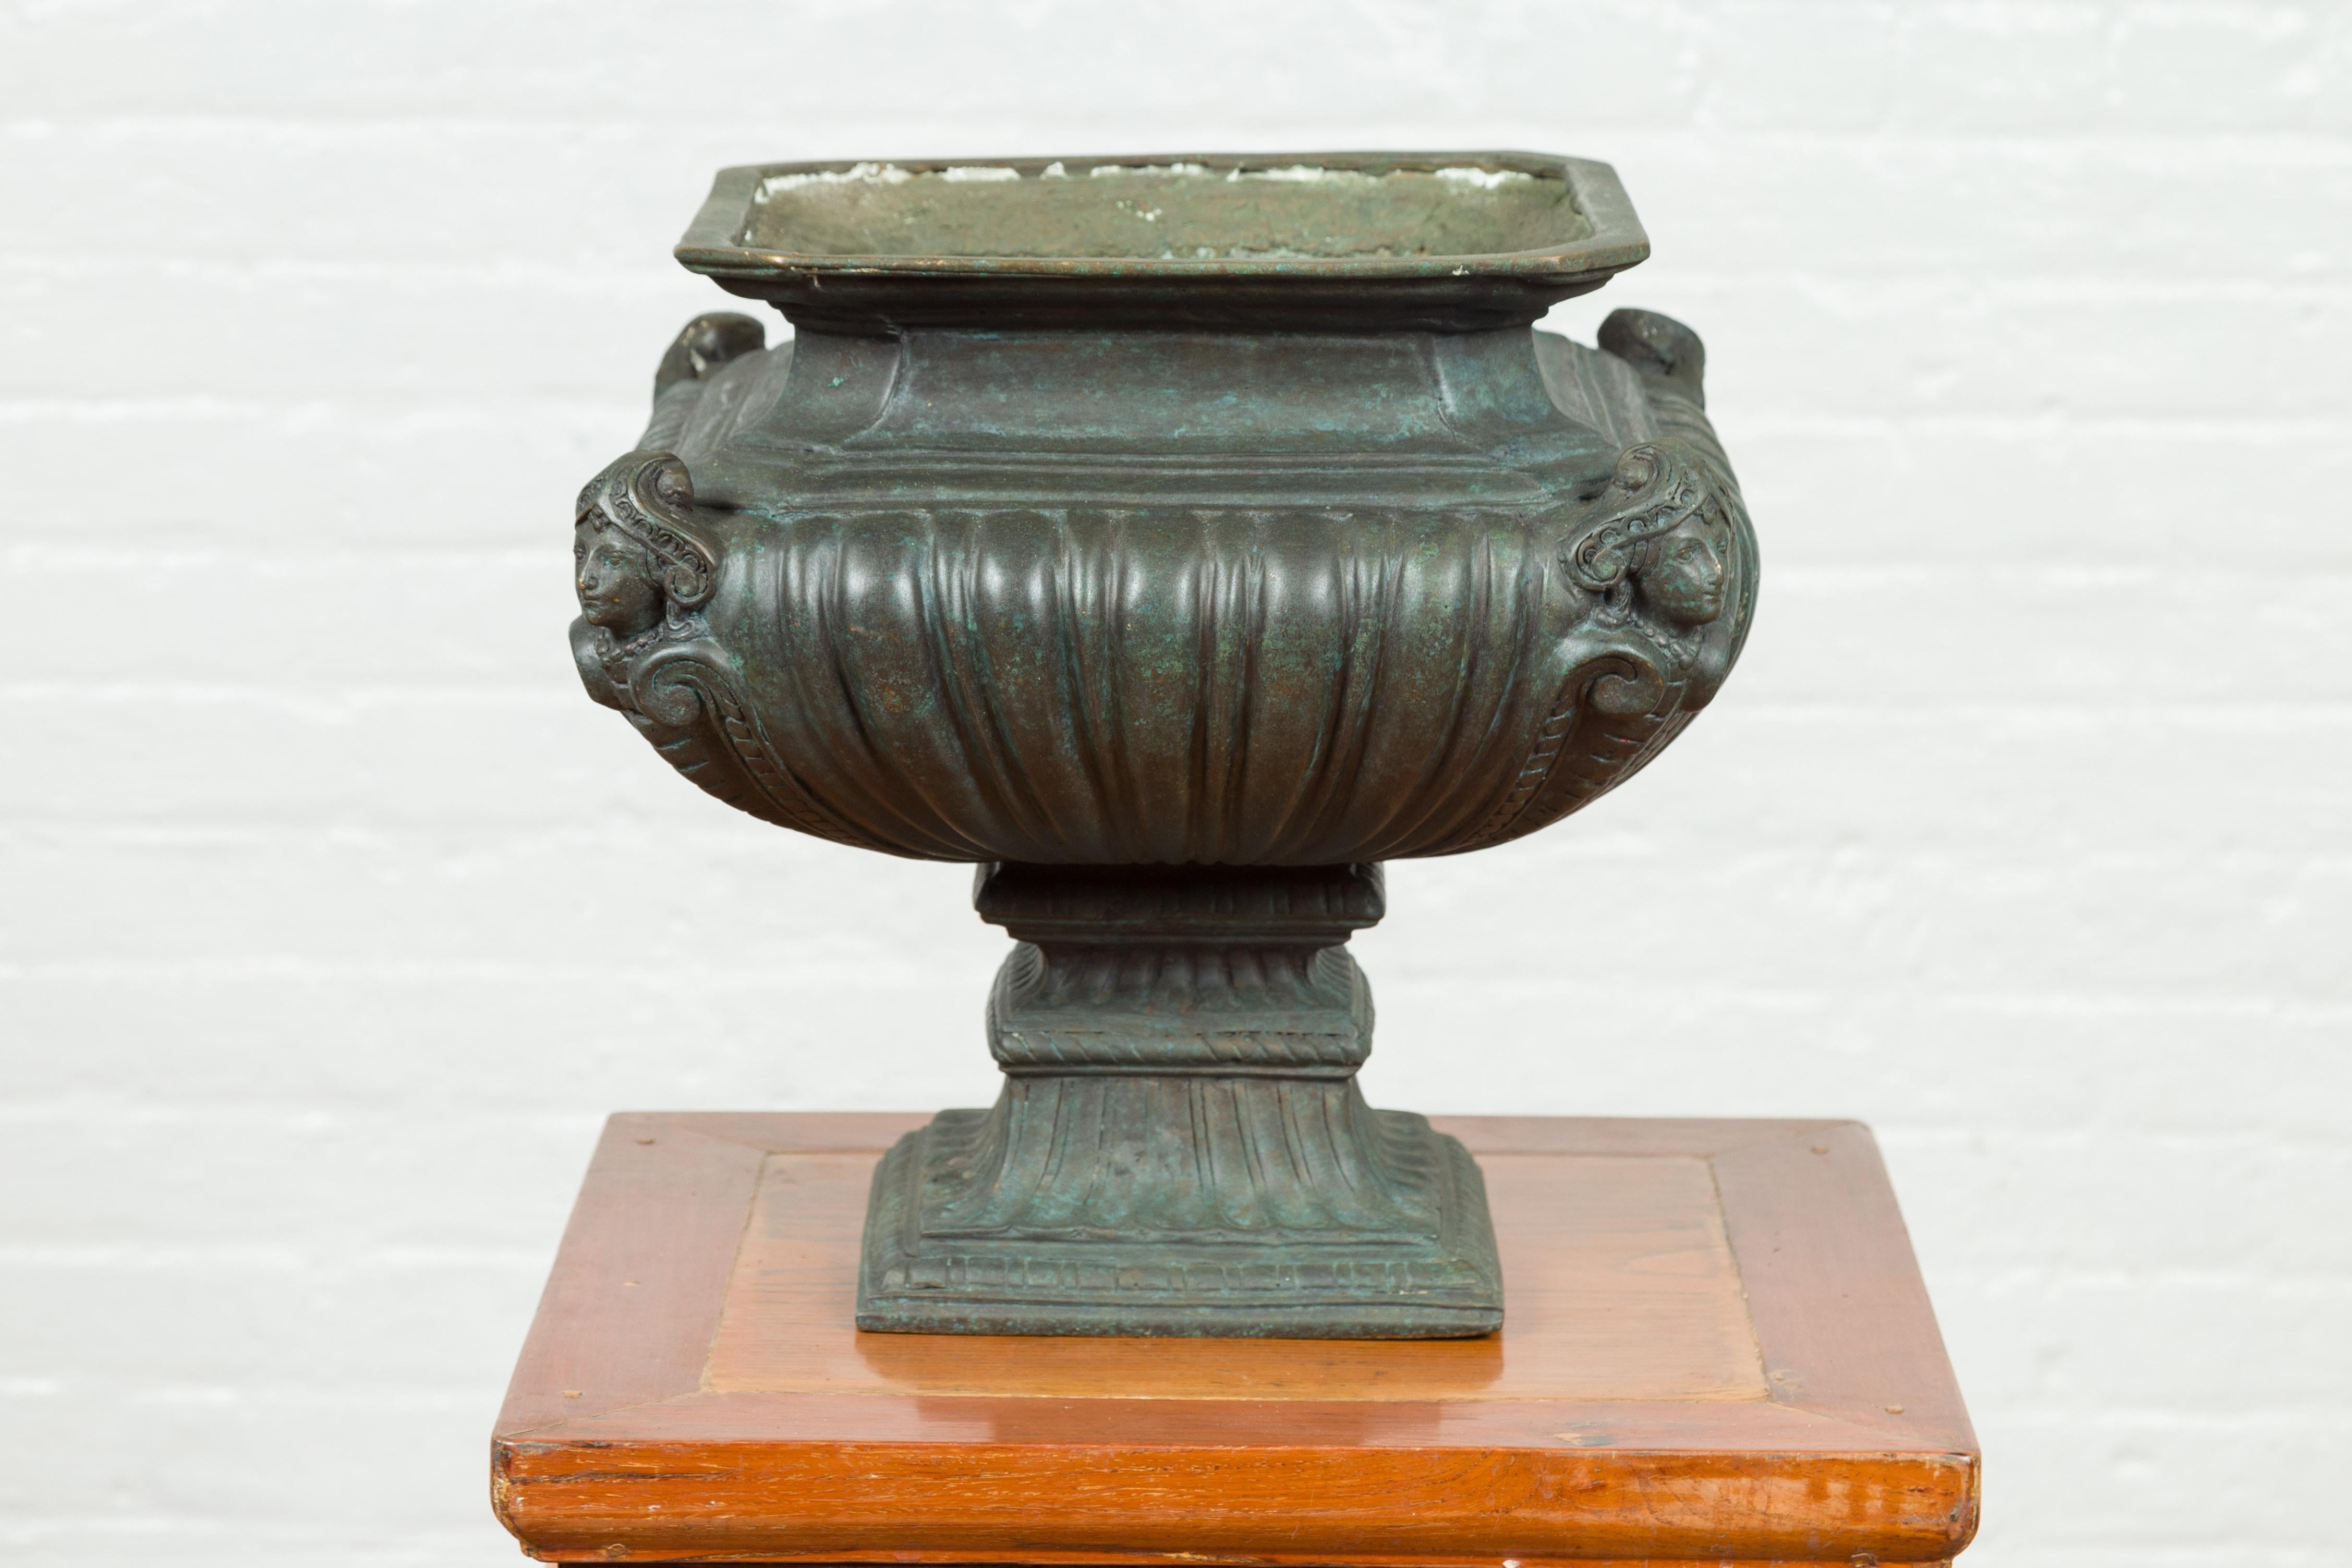 Contemporary Cast Bronze Planter with Figures, Gadroon Motifs and Verde Patina For Sale 8